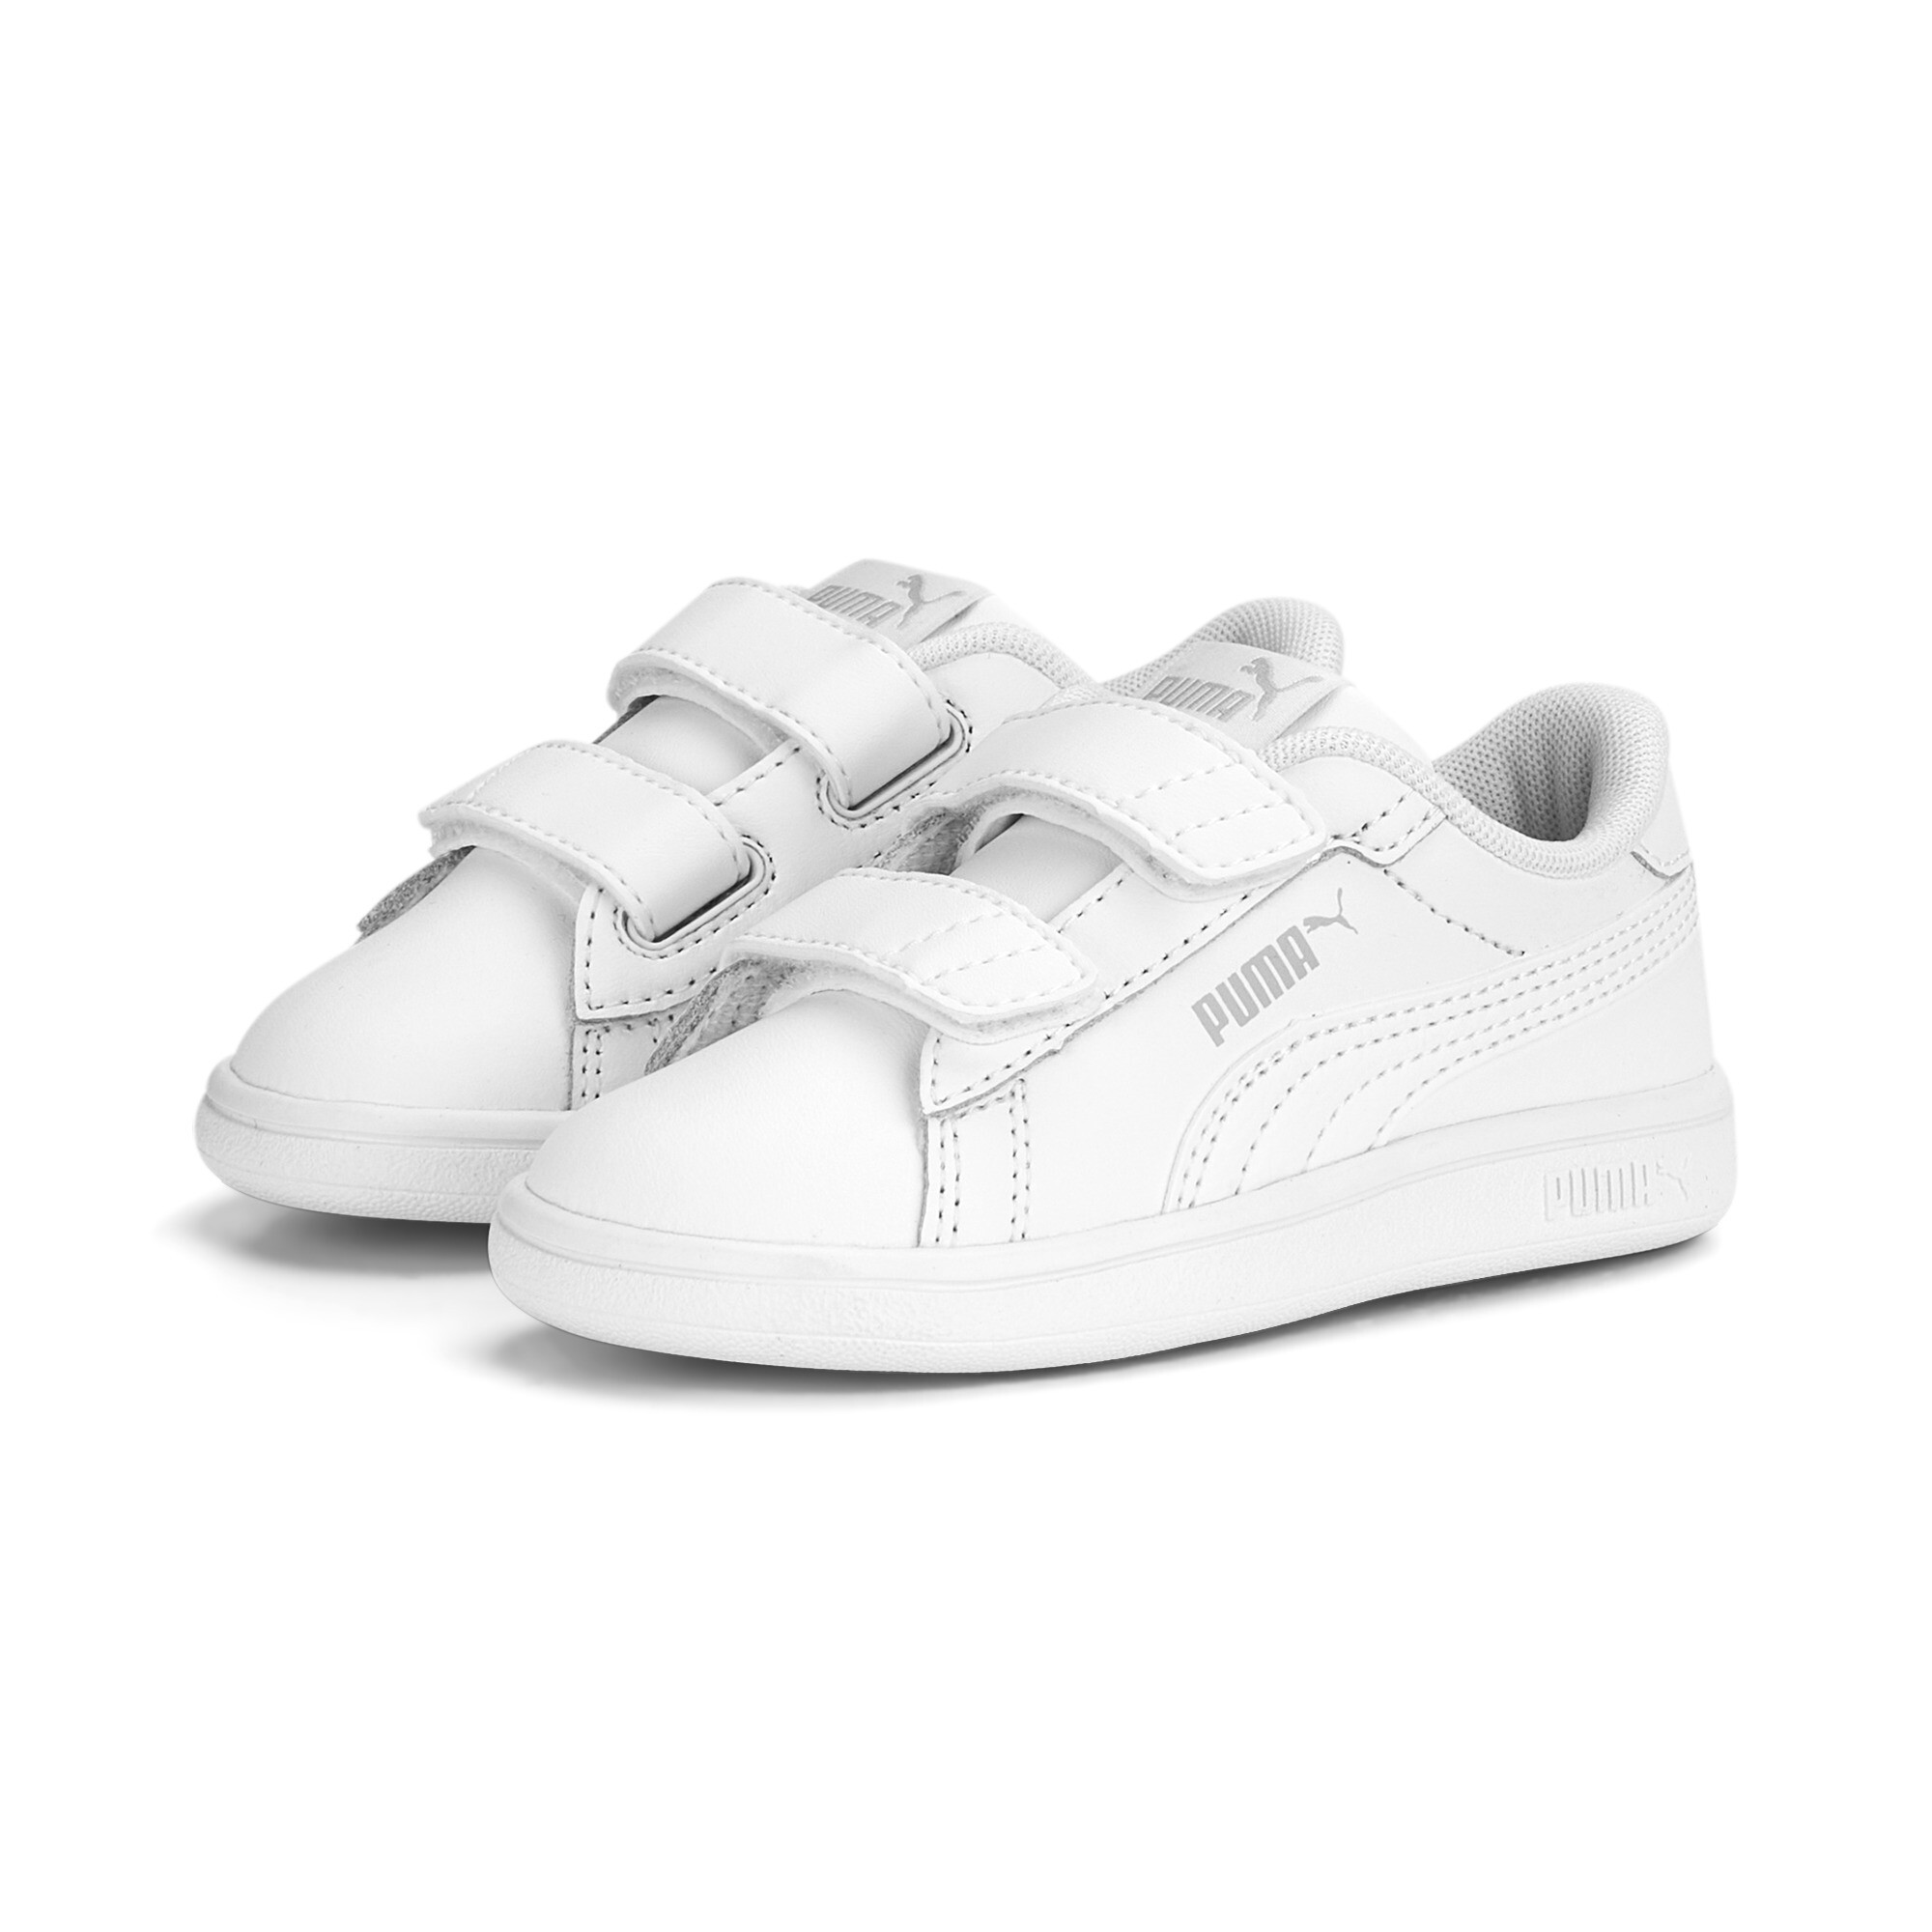 Kids' PUMA Smash 3.0 Leather V Sneakers Baby In White, Size EU 20